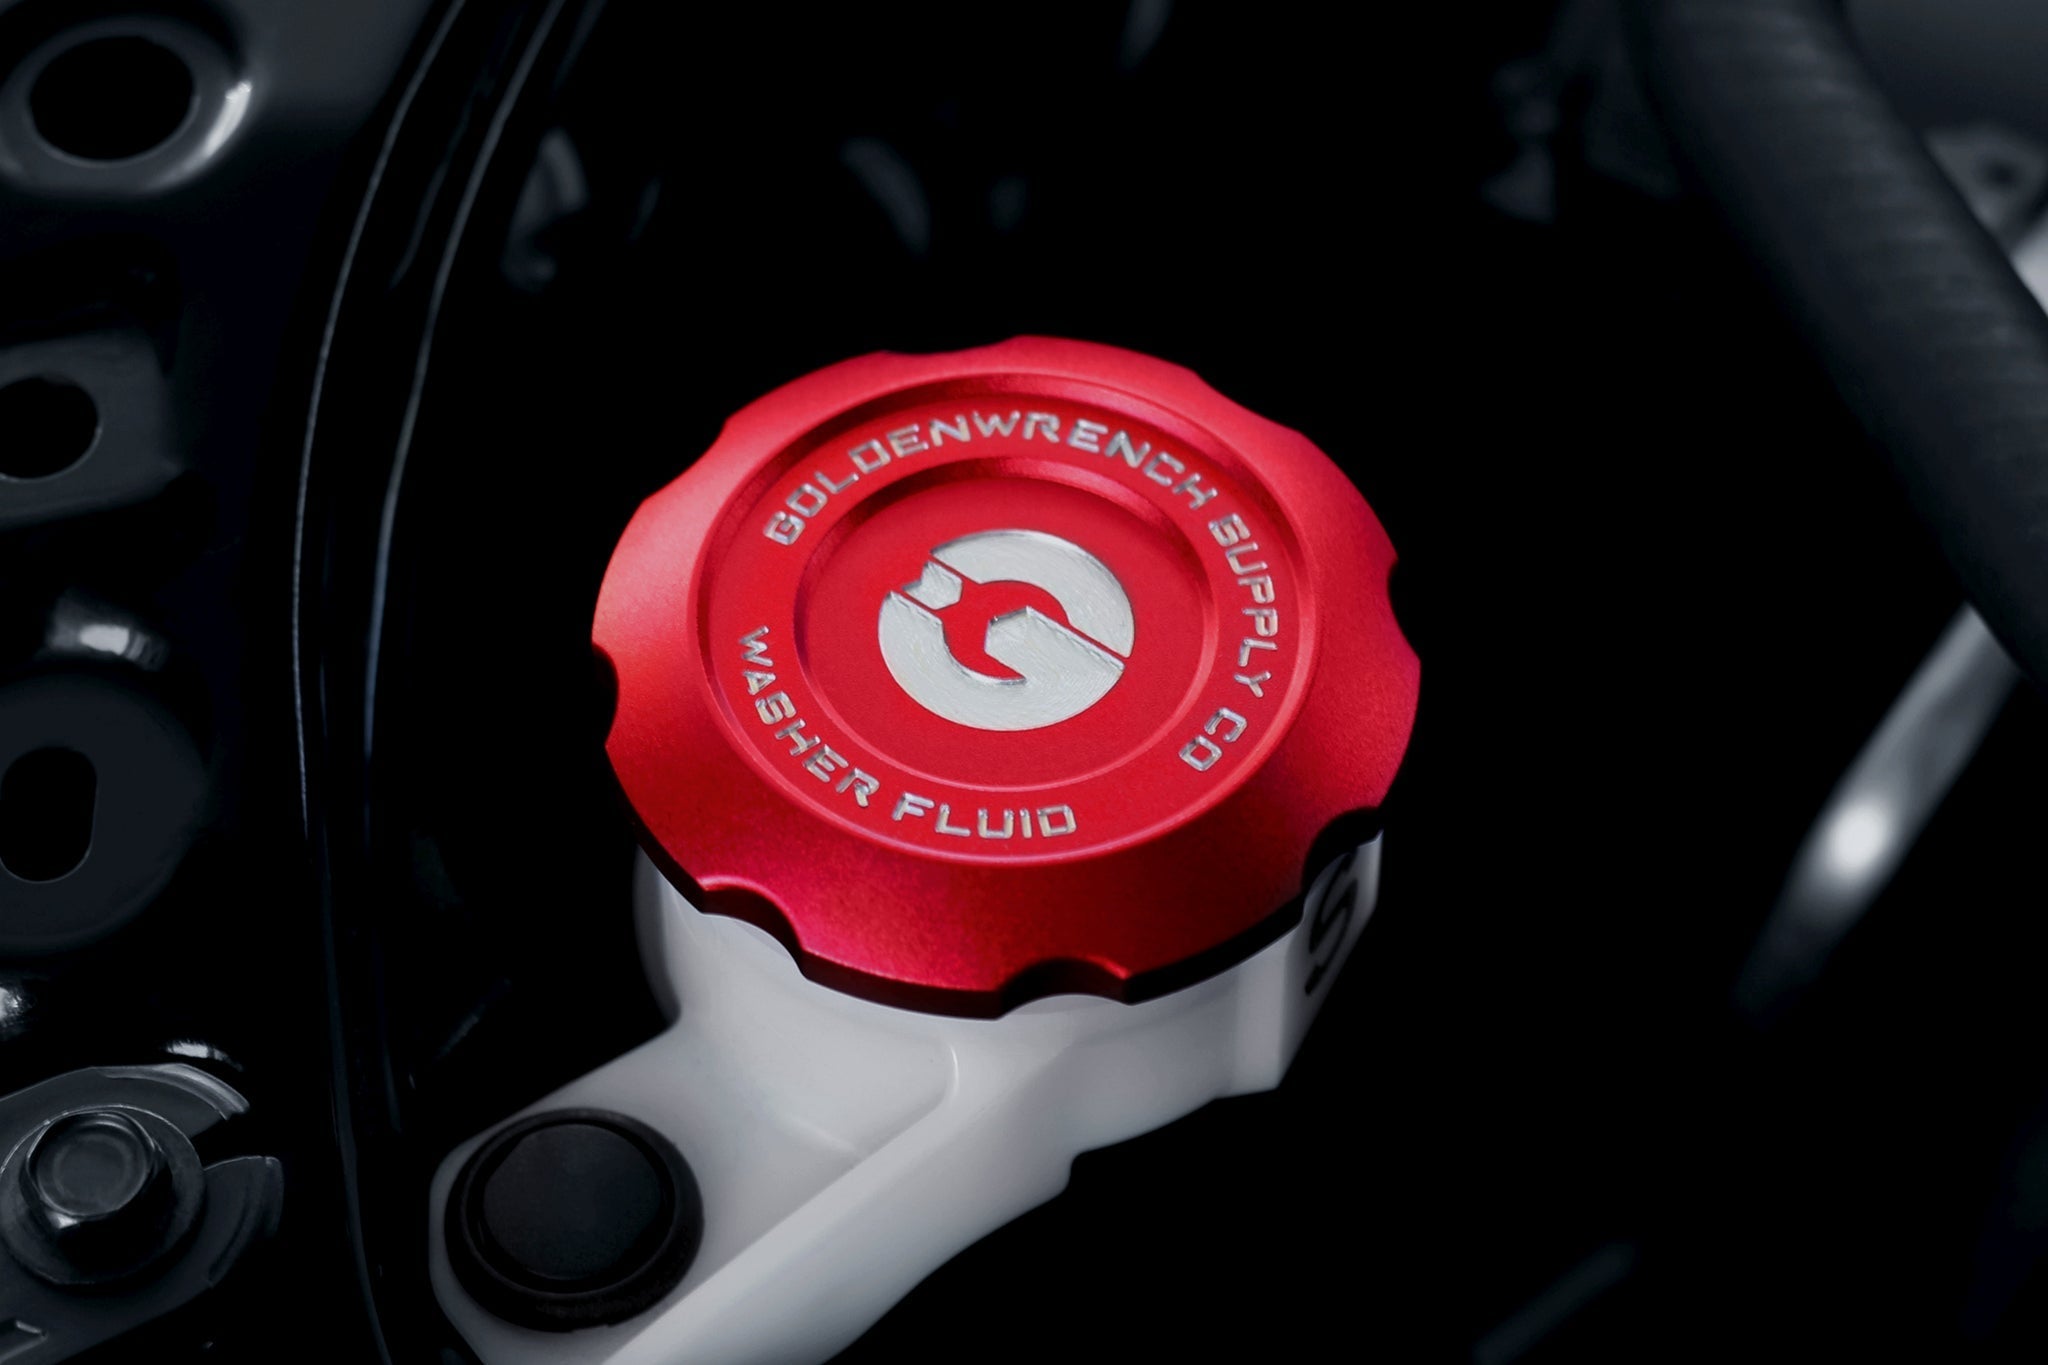 Goldenwrench Blackline Performance Toyota GR Corolla Washer Fluid Cap - Edition Red